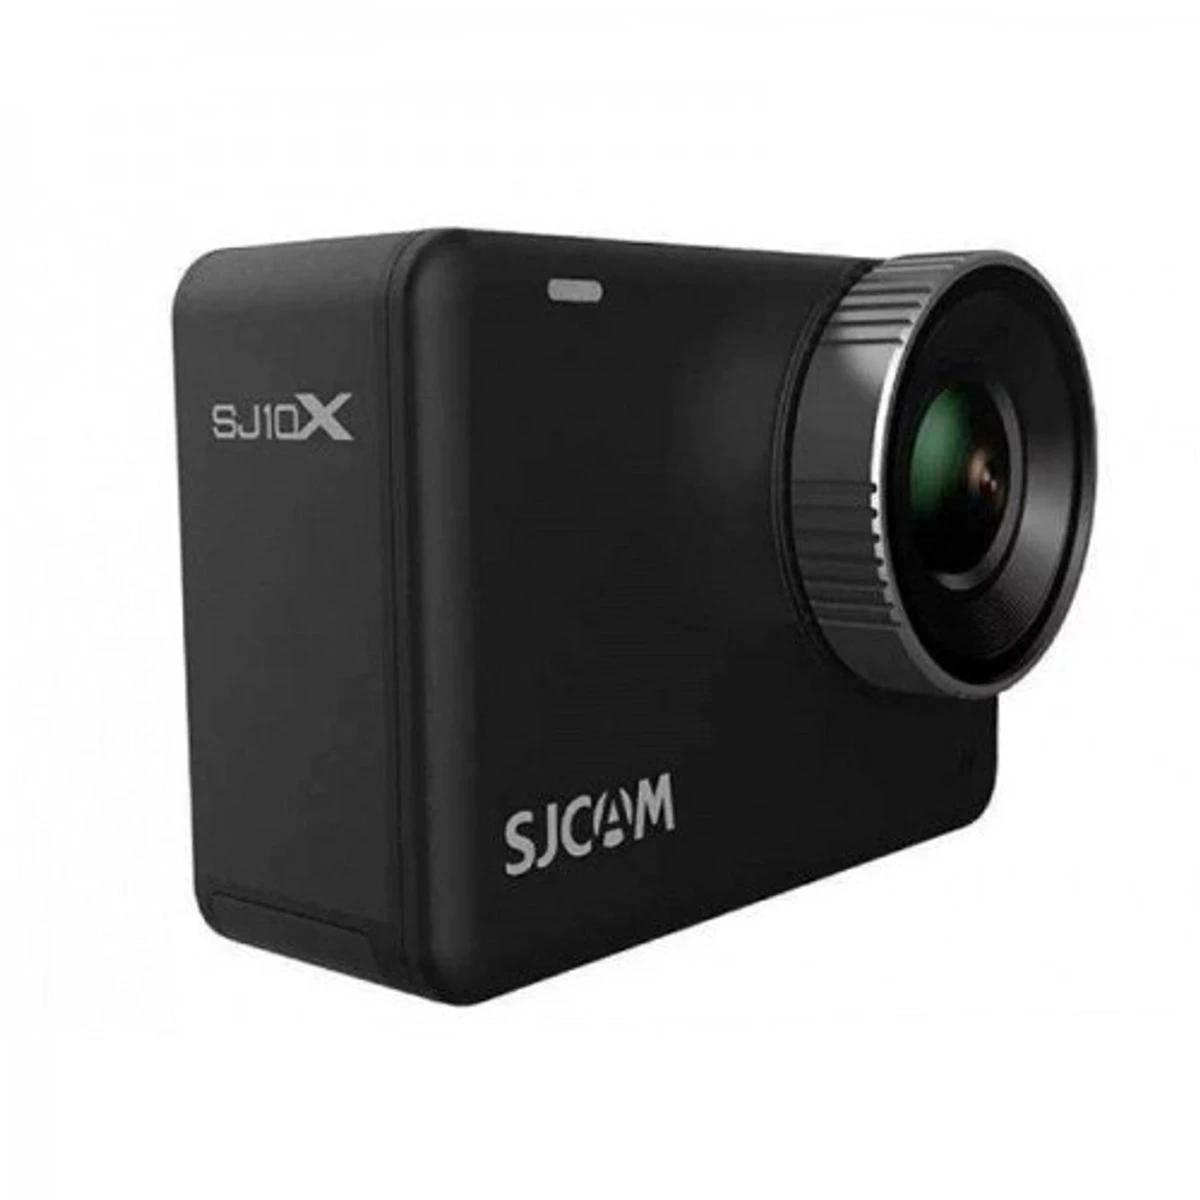 SJCAM SJ10 X 4K Action Camera (12 MP, 4K Up To 120fps, UHD IPS 2.33" Touch Display)